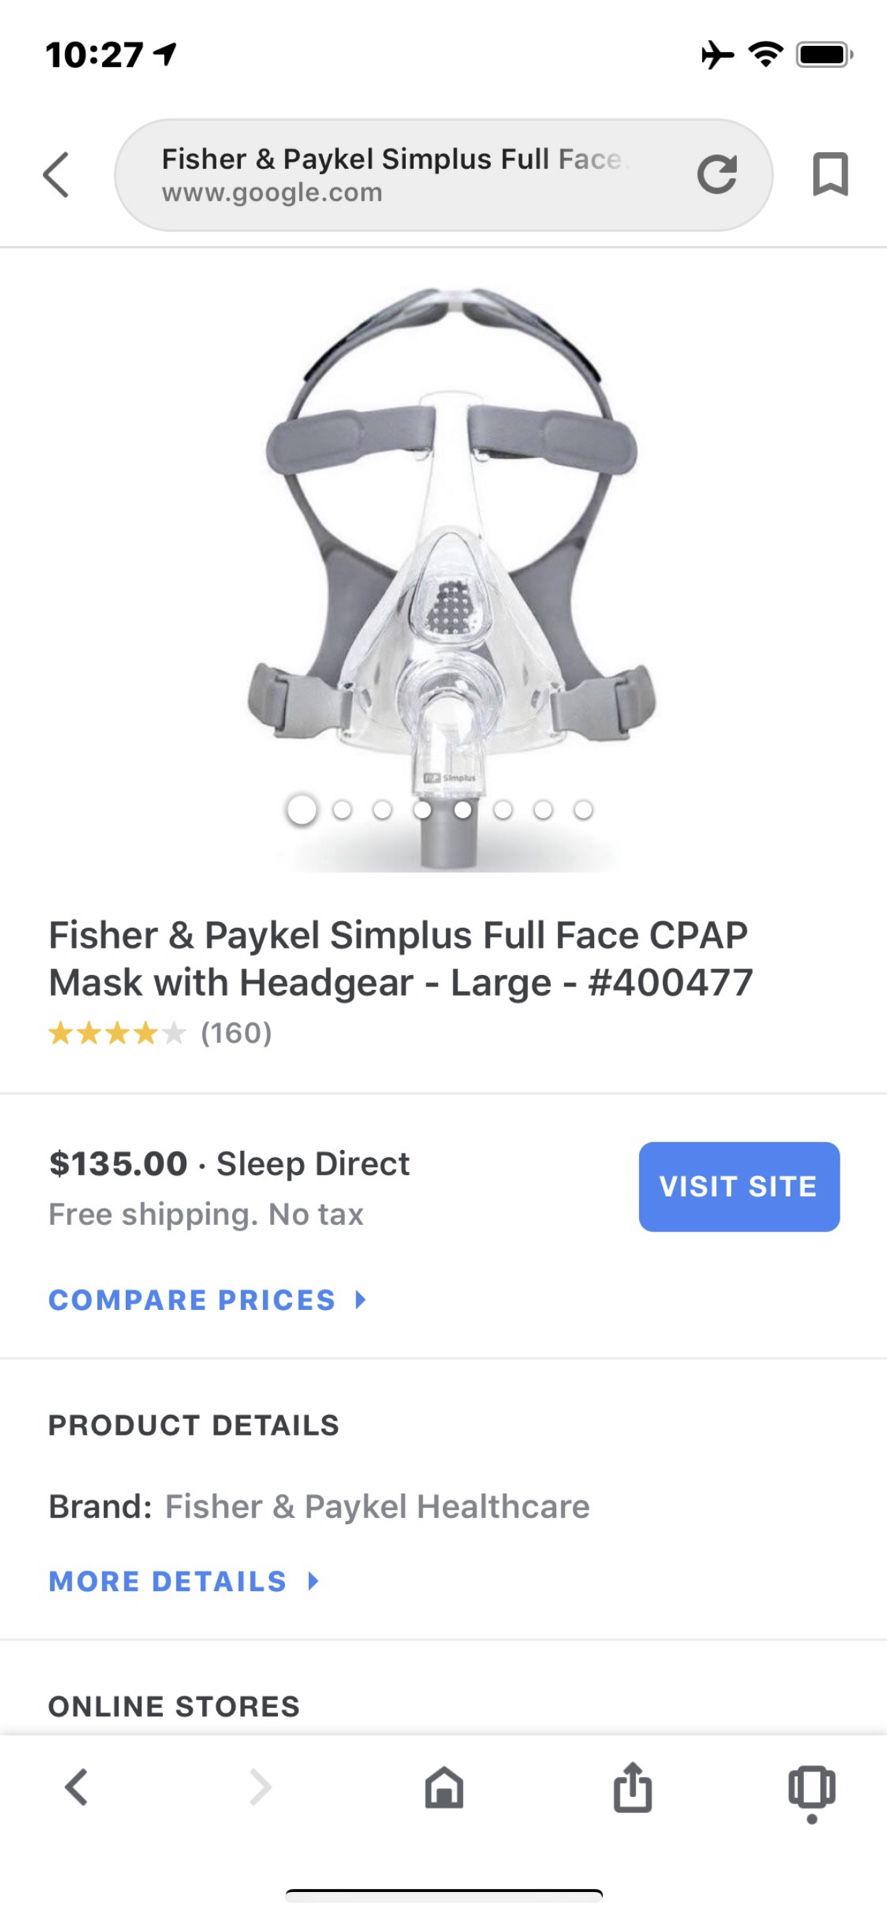 Fisher & Paykel Simplus Full Face CPAP Mask with Headgear #400477 Large